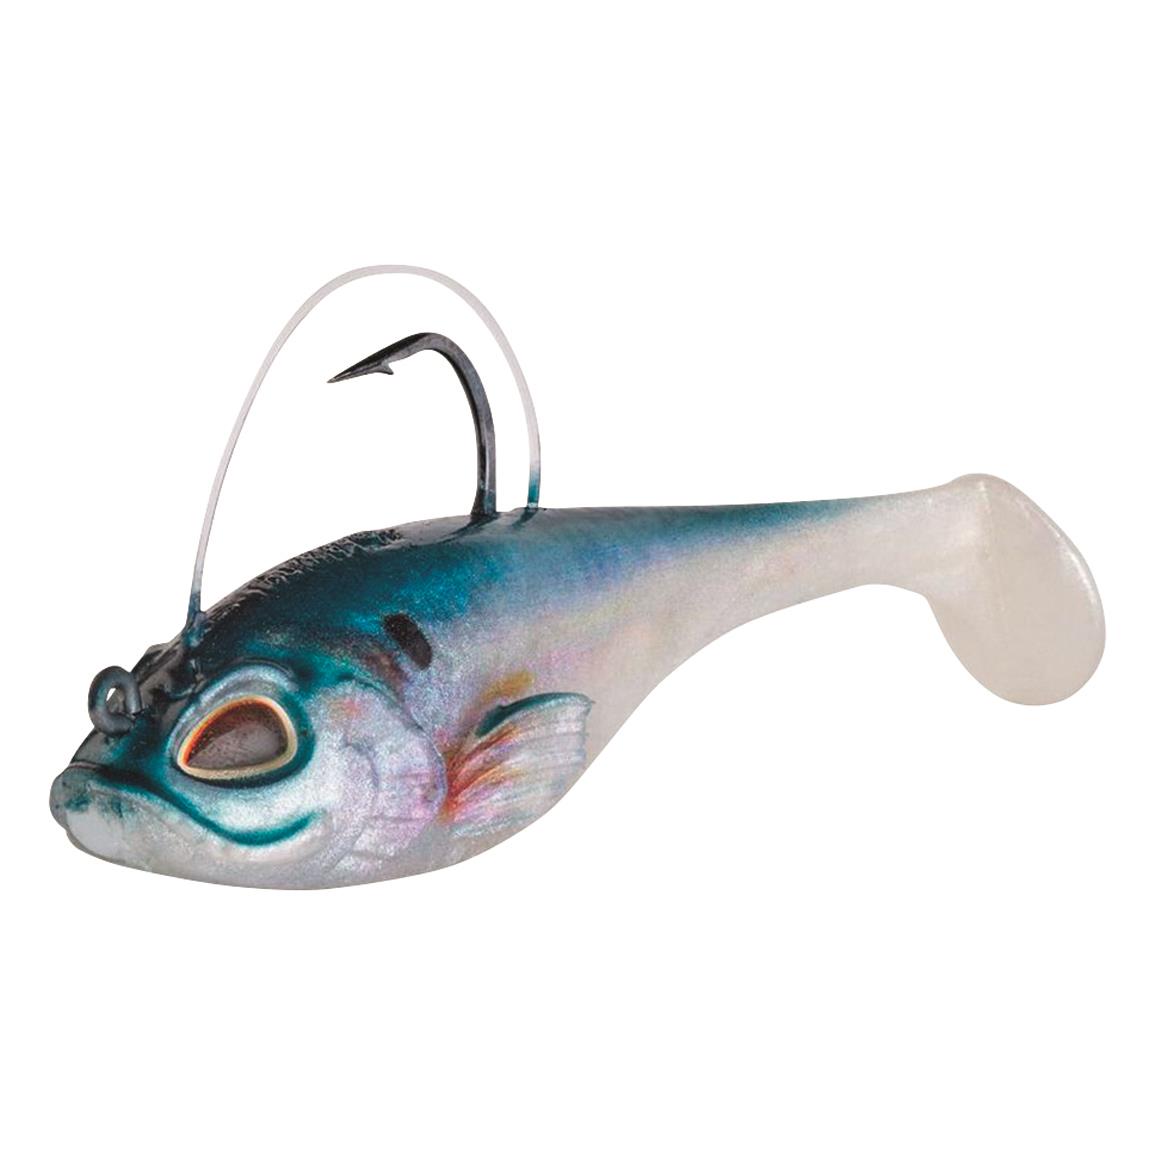 Kalin's Tickle Shads, 8 Pack - 735532, Swimbaits at Sportsman's Guide